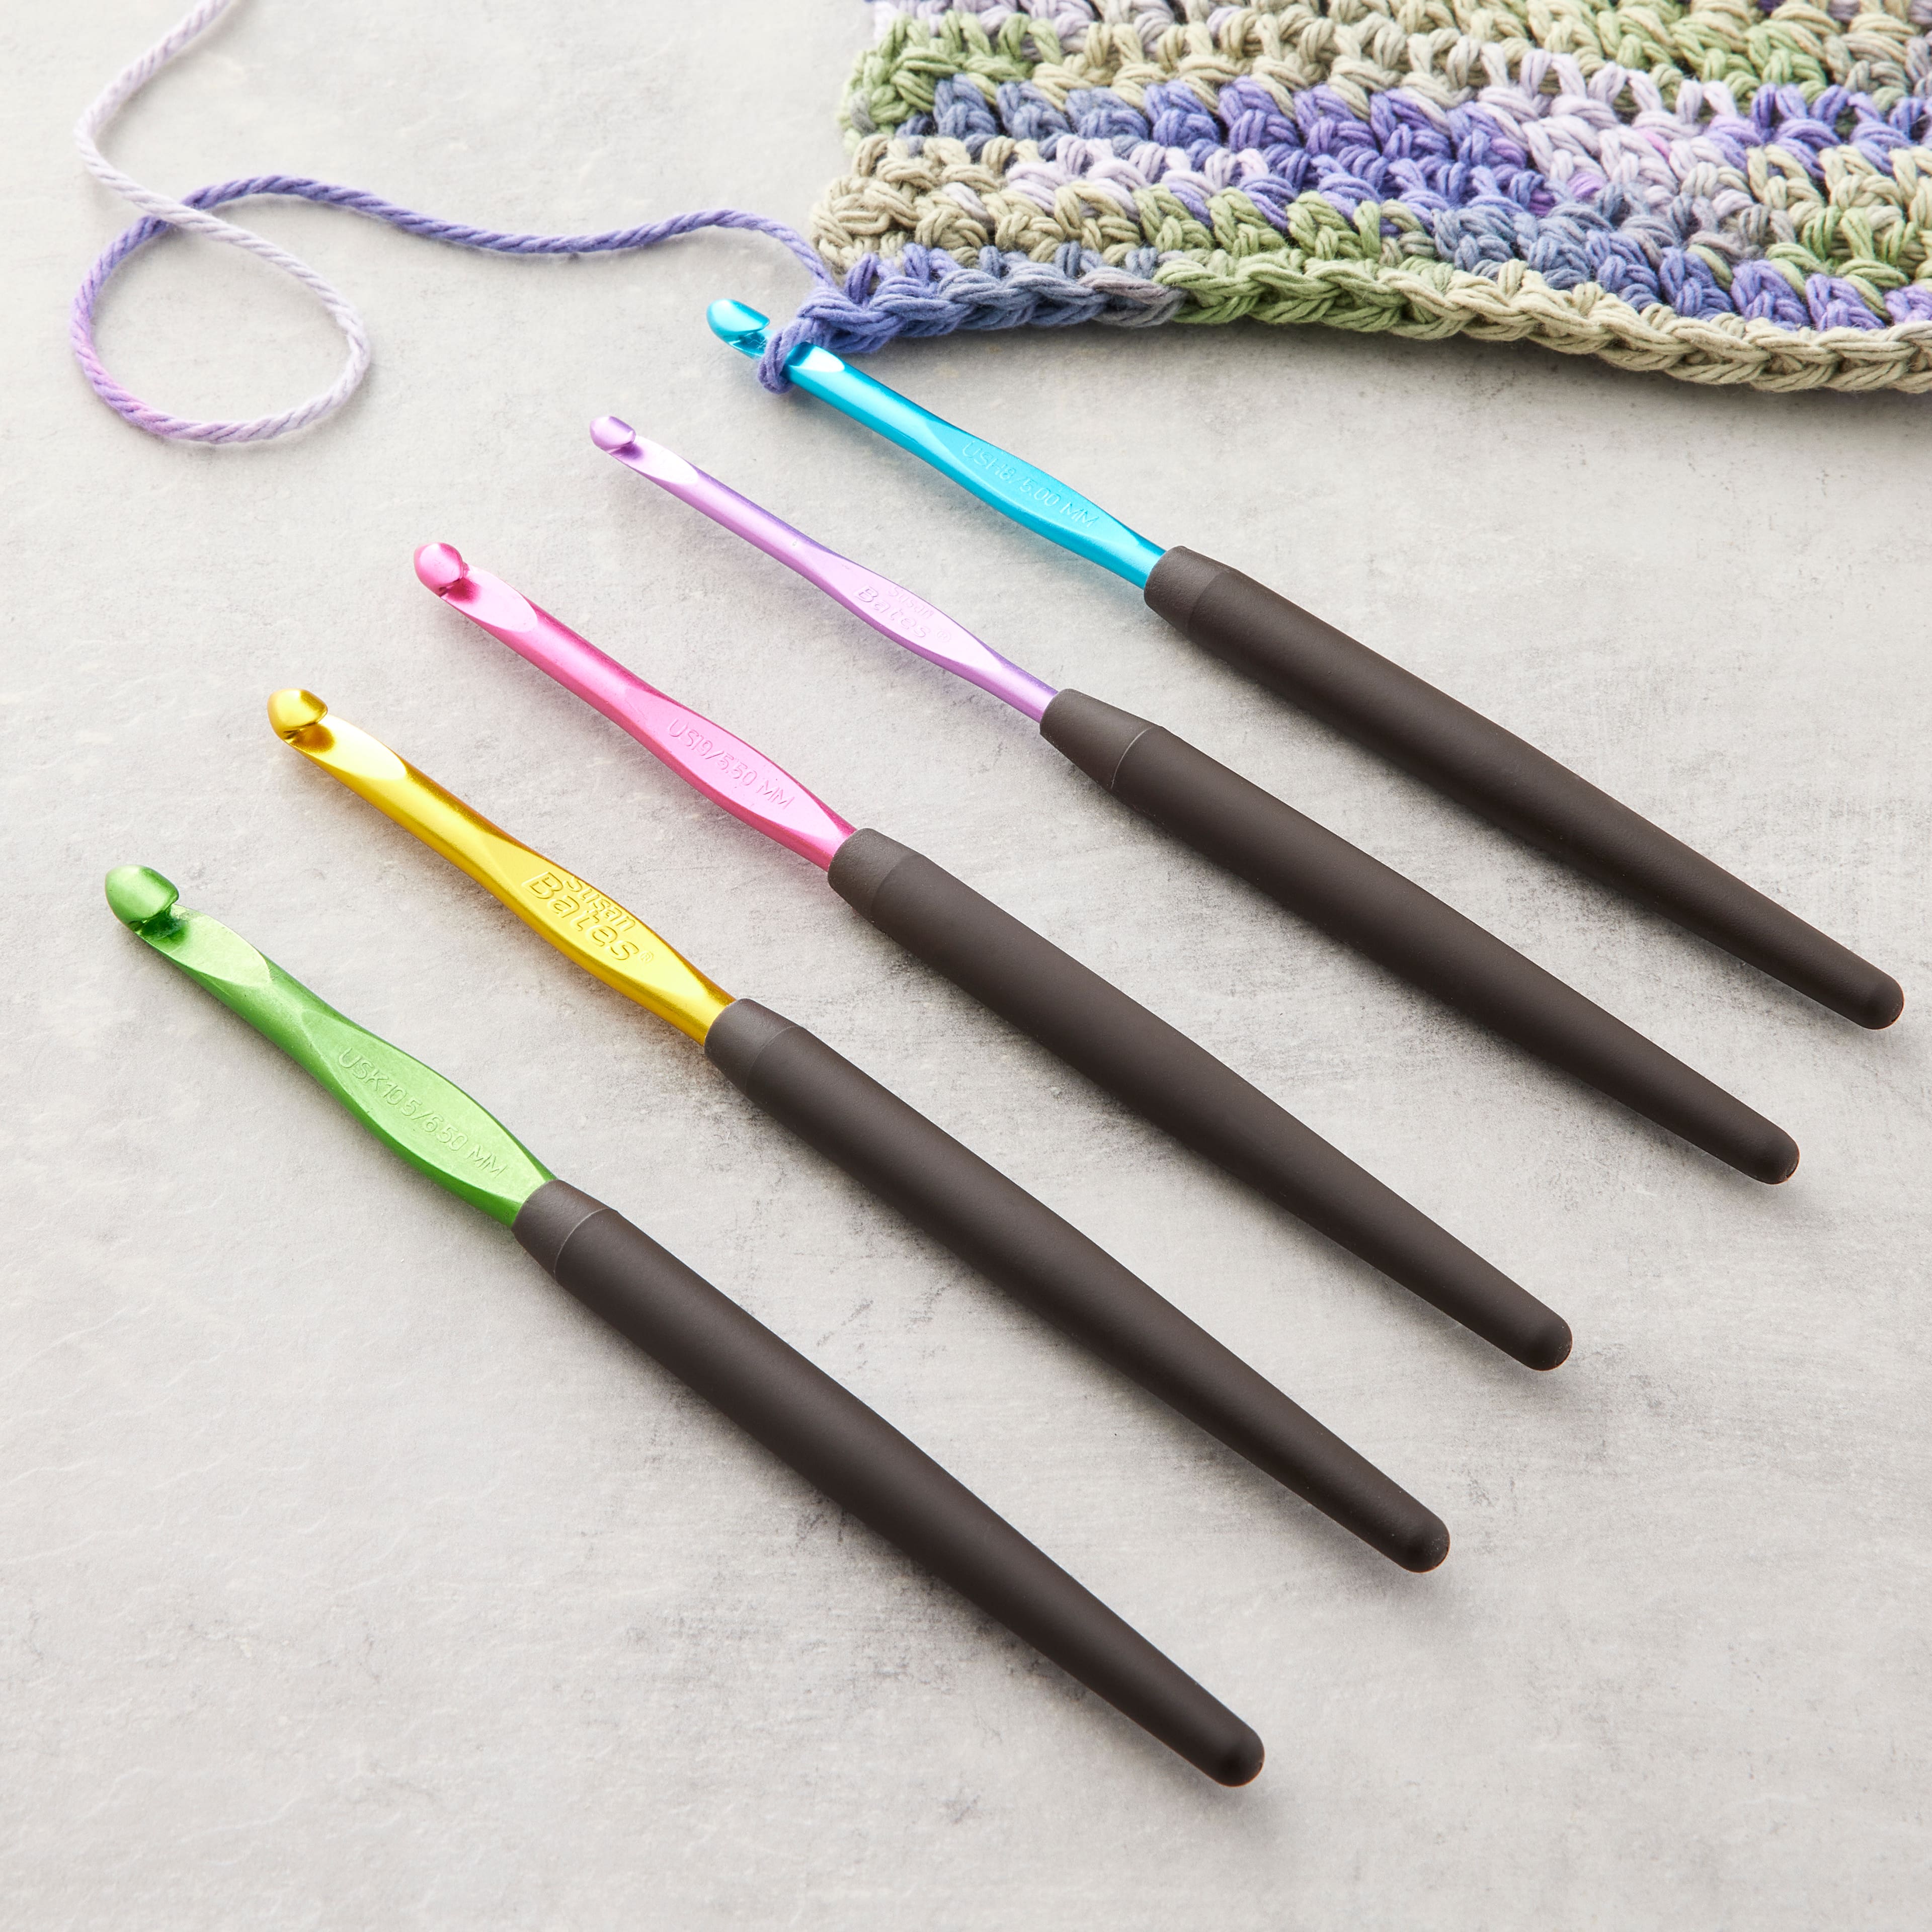  8 Sizes Crochet Hooks Set,Ergonomic Crochet Hooks with Soft  Rubber Handles and Number Marks for Grandmothers,Moms,Children,Beginners or  Advanced Crochet Lovers : Arts, Crafts & Sewing